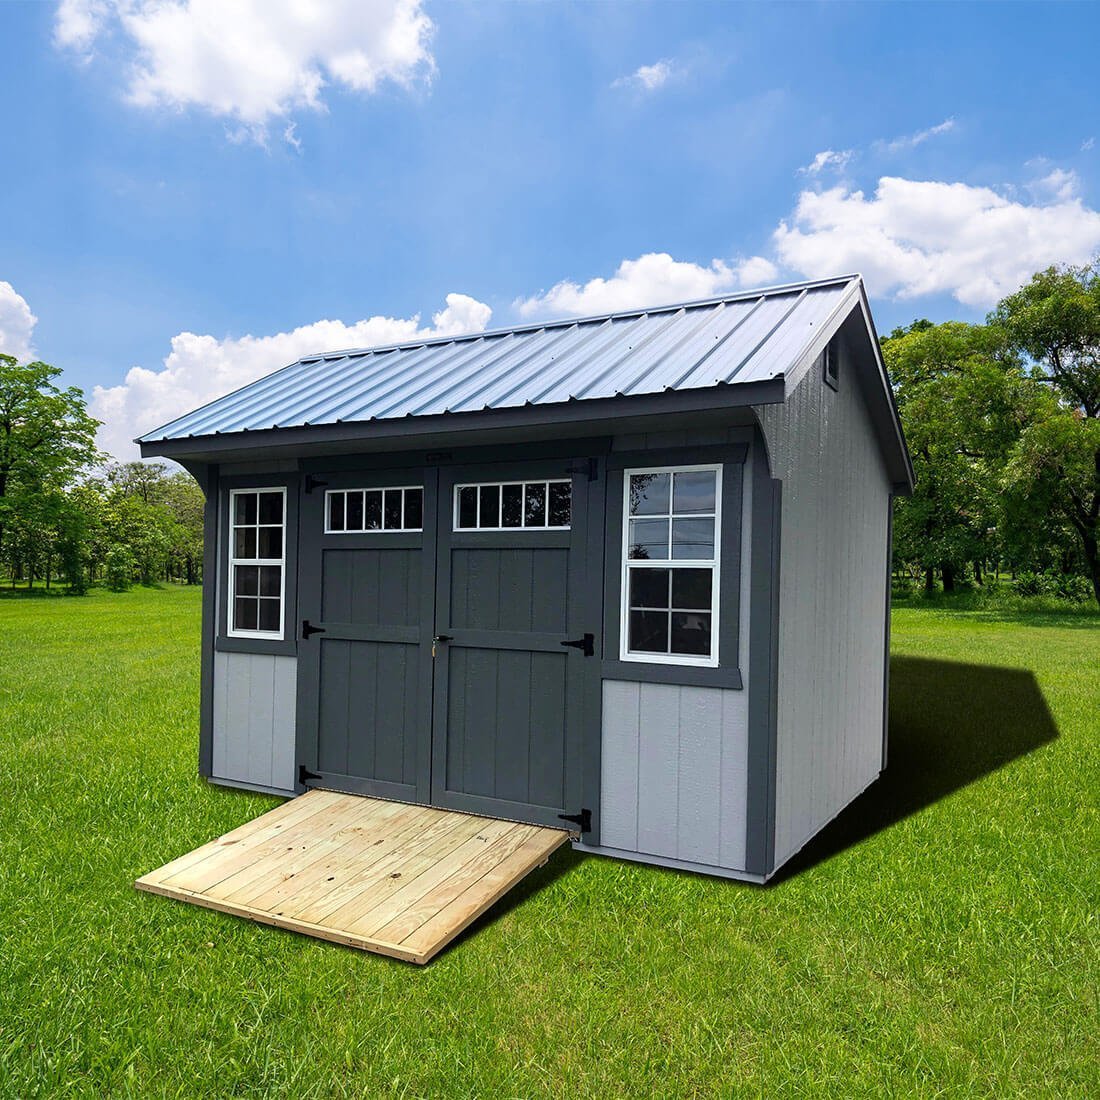 Light gray with dark gray trim and roof classic quaker shed